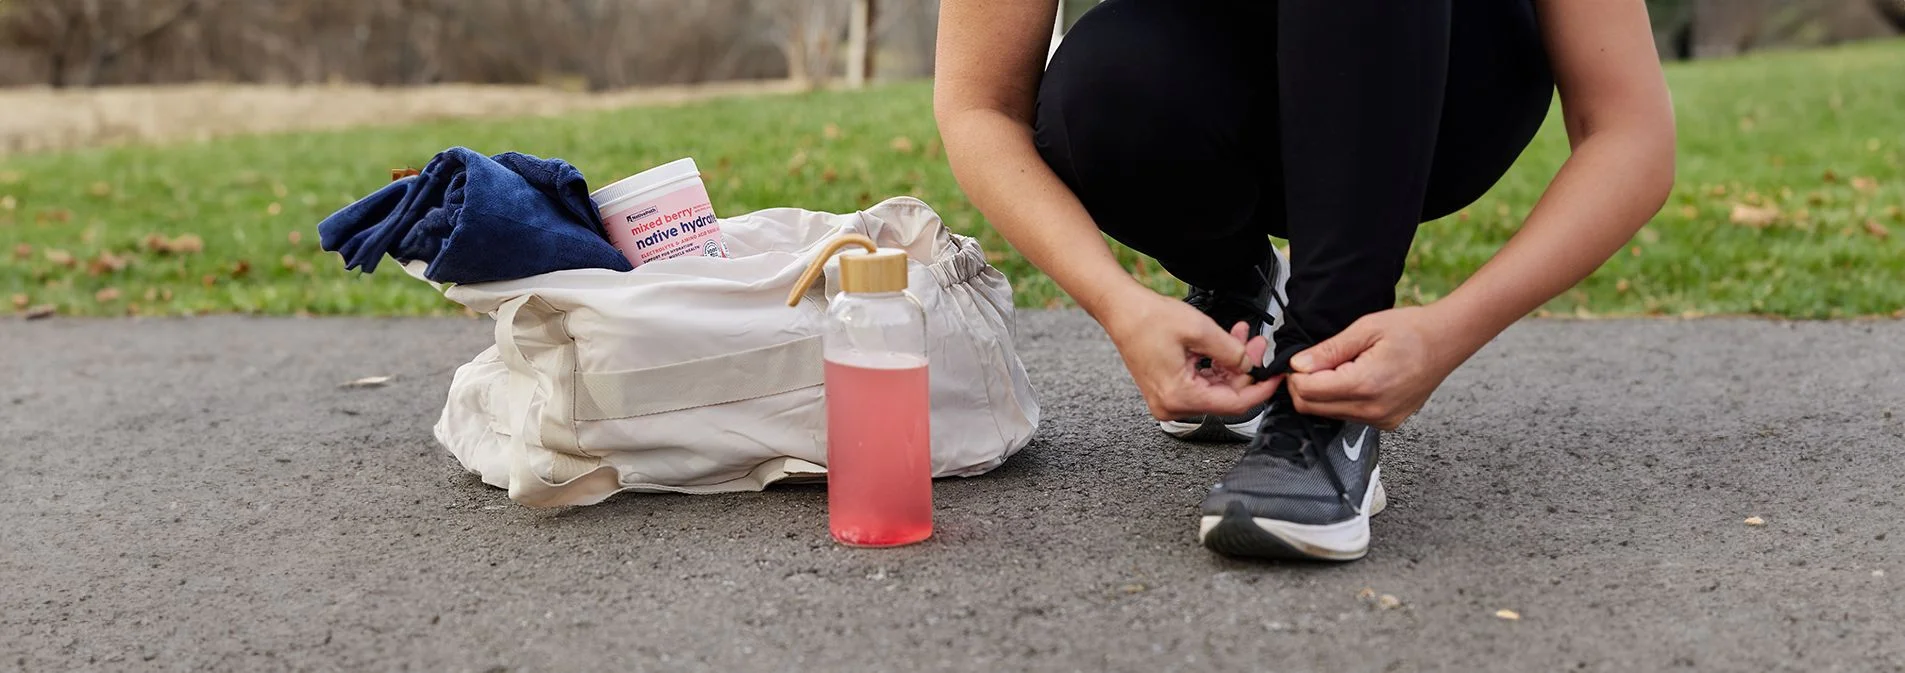 A woman tying her shoes with a container of Native Hydrate in her workout bag next to her